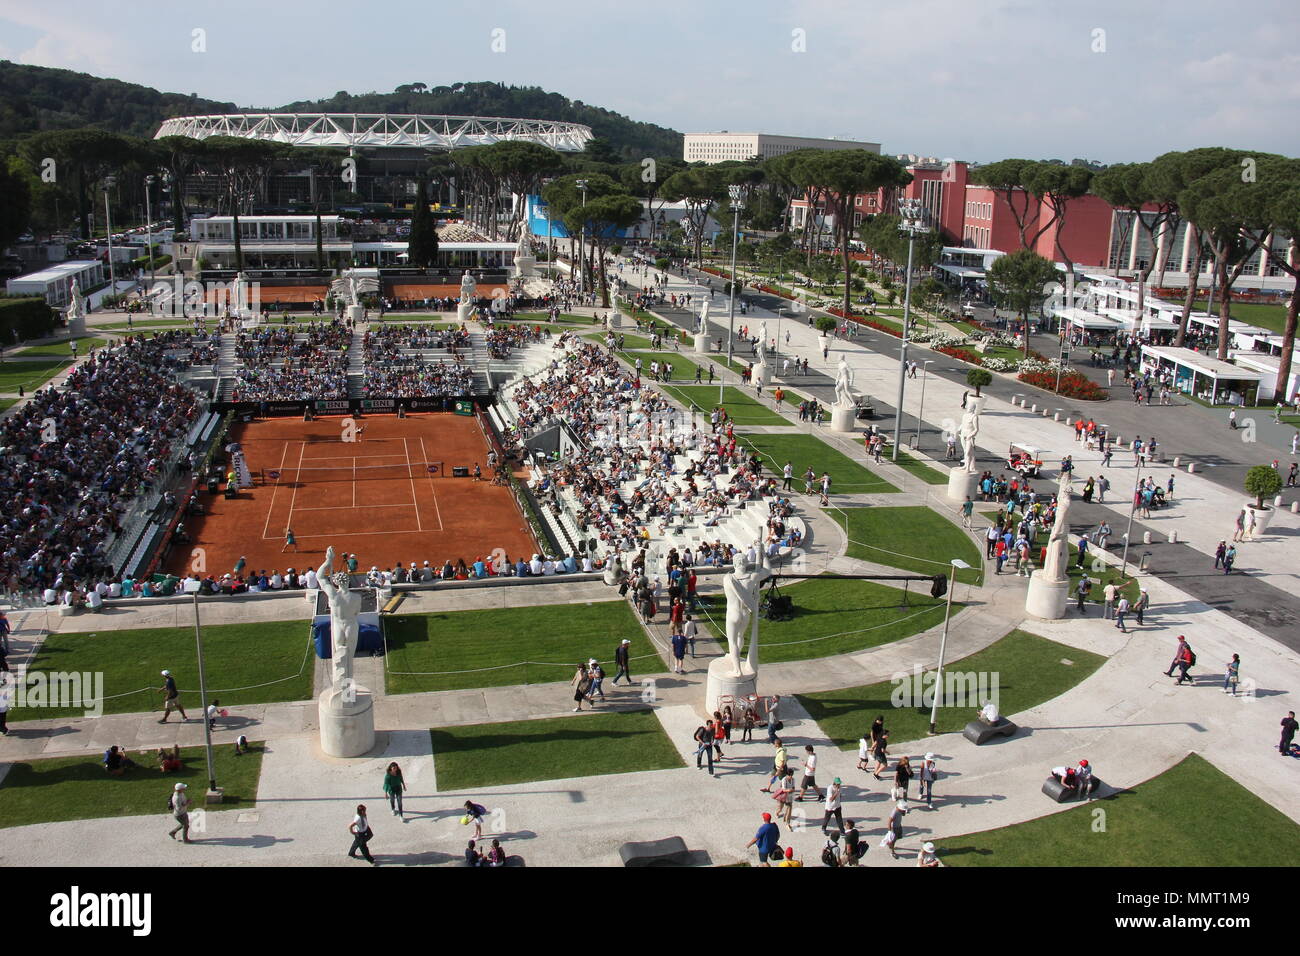 Rome, Italy. 12th May, 2018. Scenes at the ATP World Tour Masters 1000 Rome  tennis tournament at the Foro Italico in Rome Credit: Gari Wyn  Williams/Alamy Live News Stock Photo - Alamy